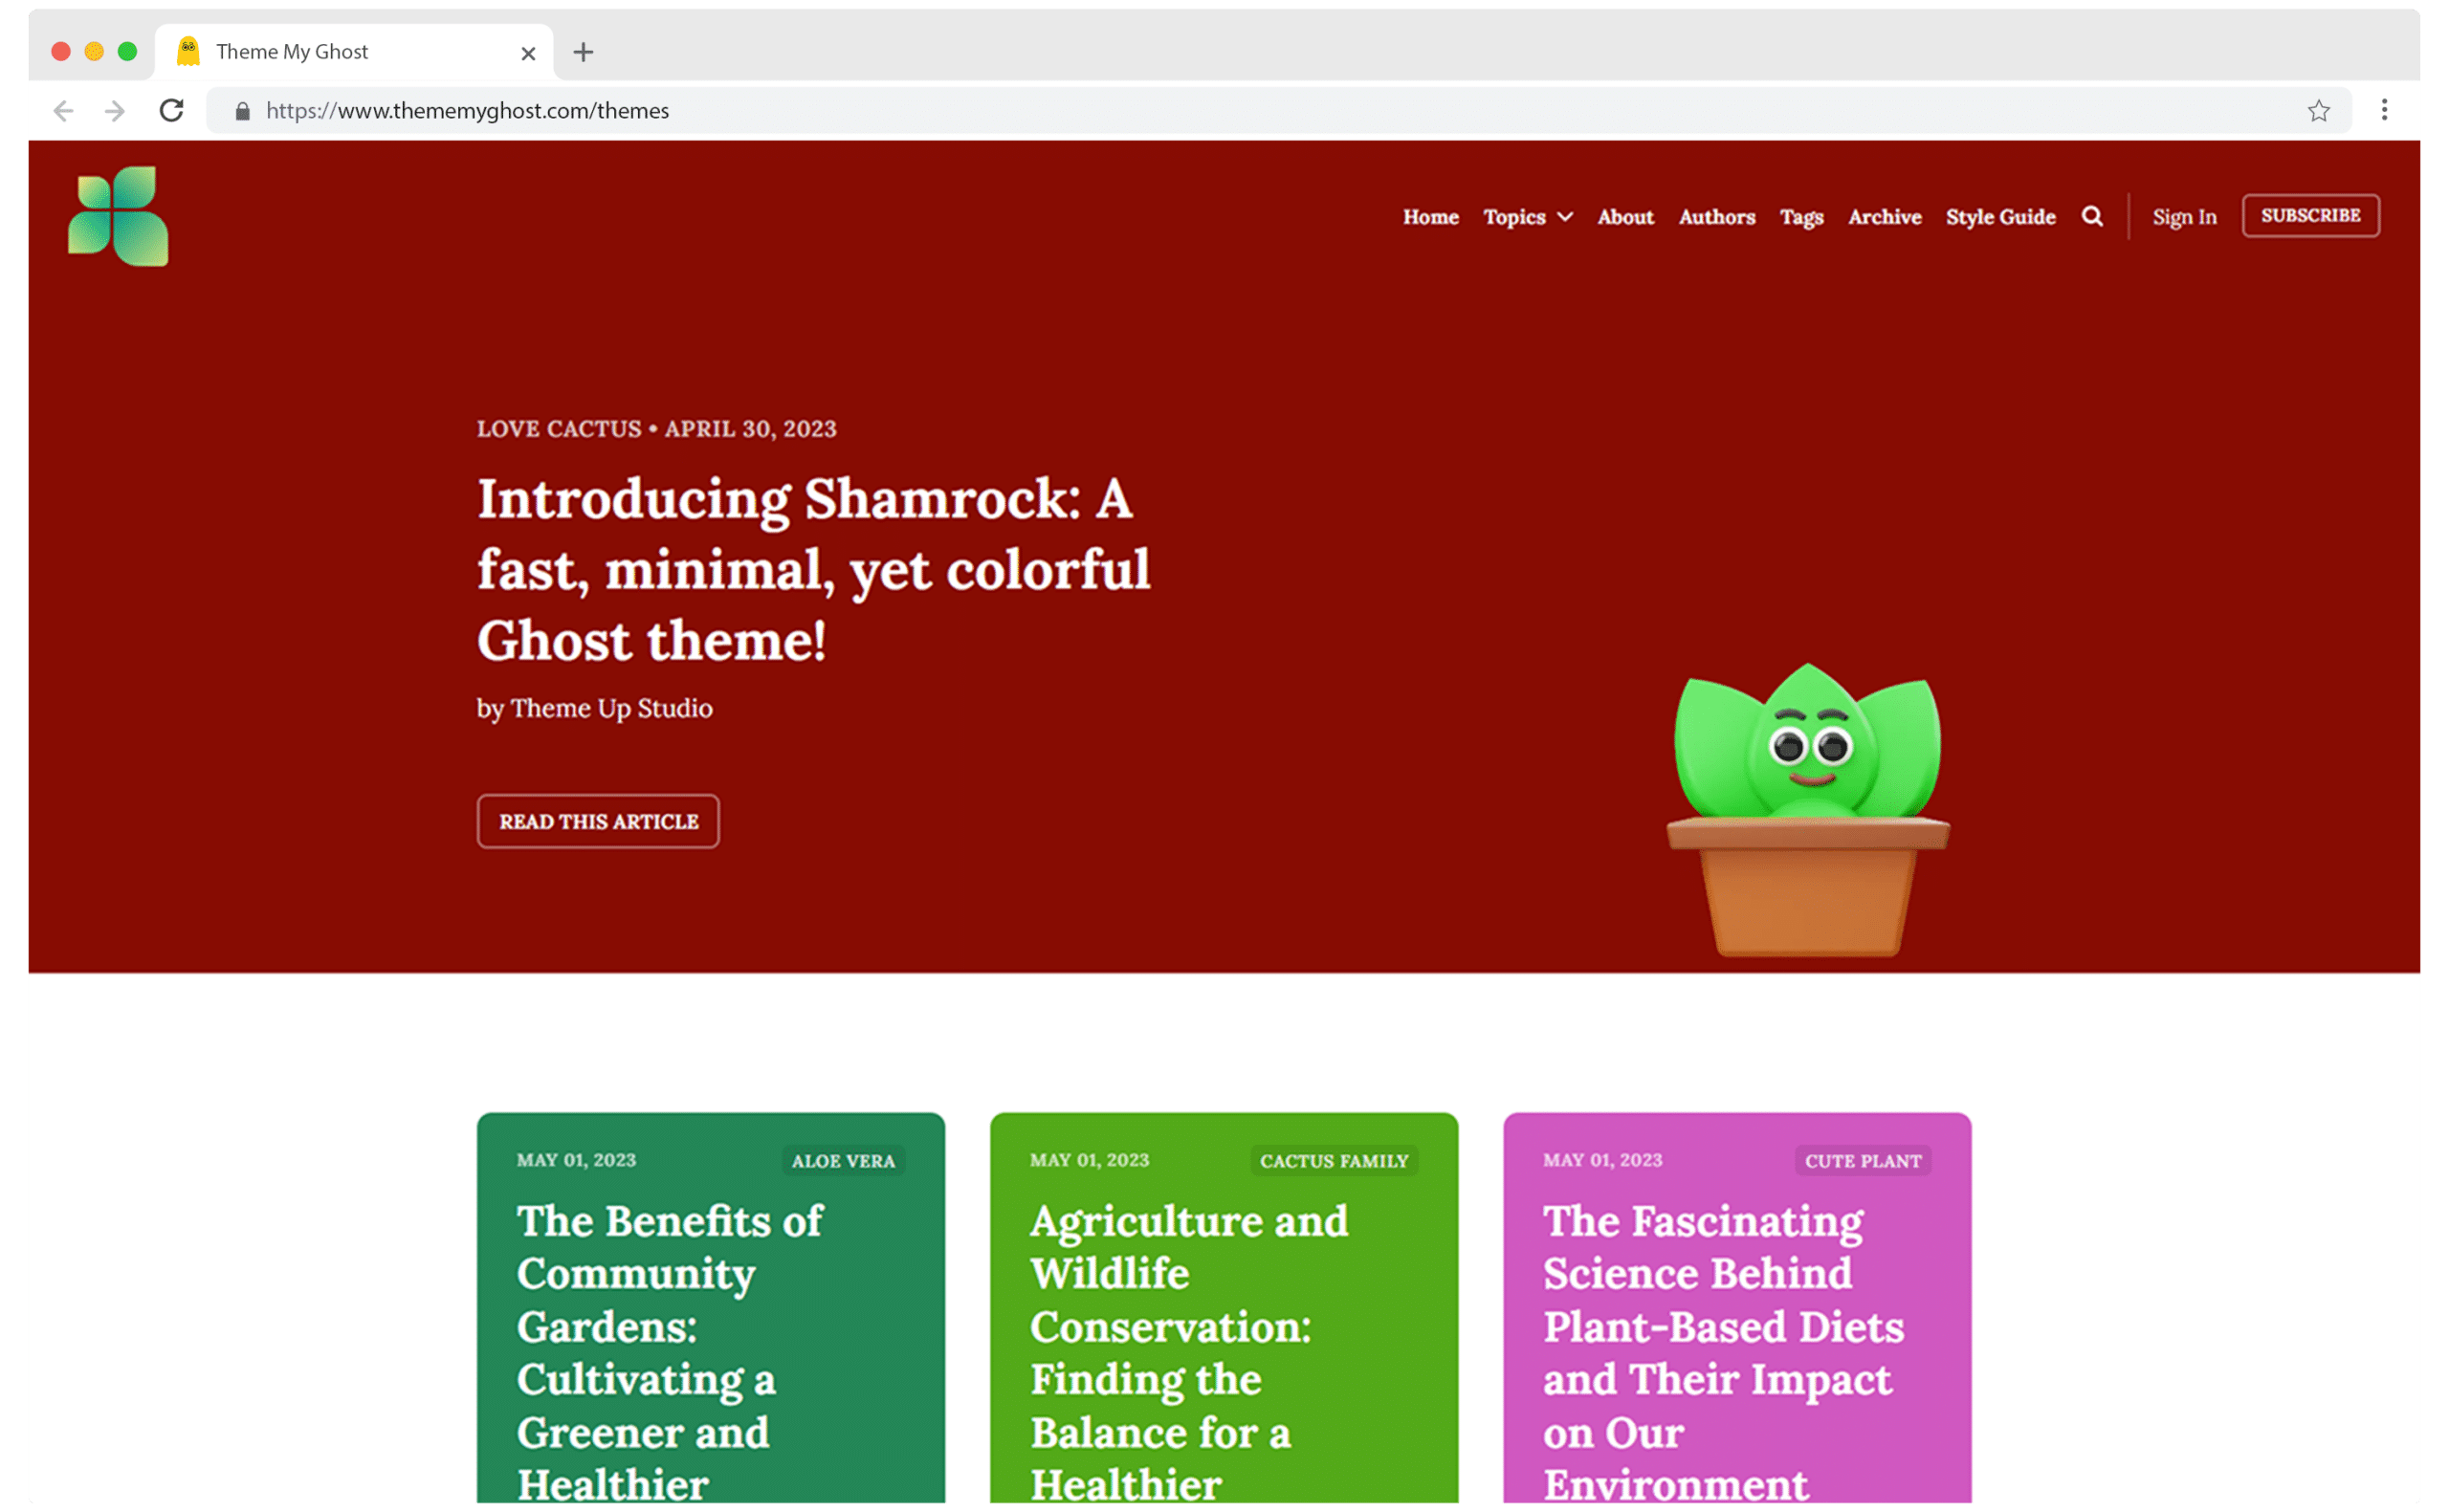 Shamrock Premium Fast Ghost Blog theme by Theme Up Studio for your Minimal Colorful Ghost Blog